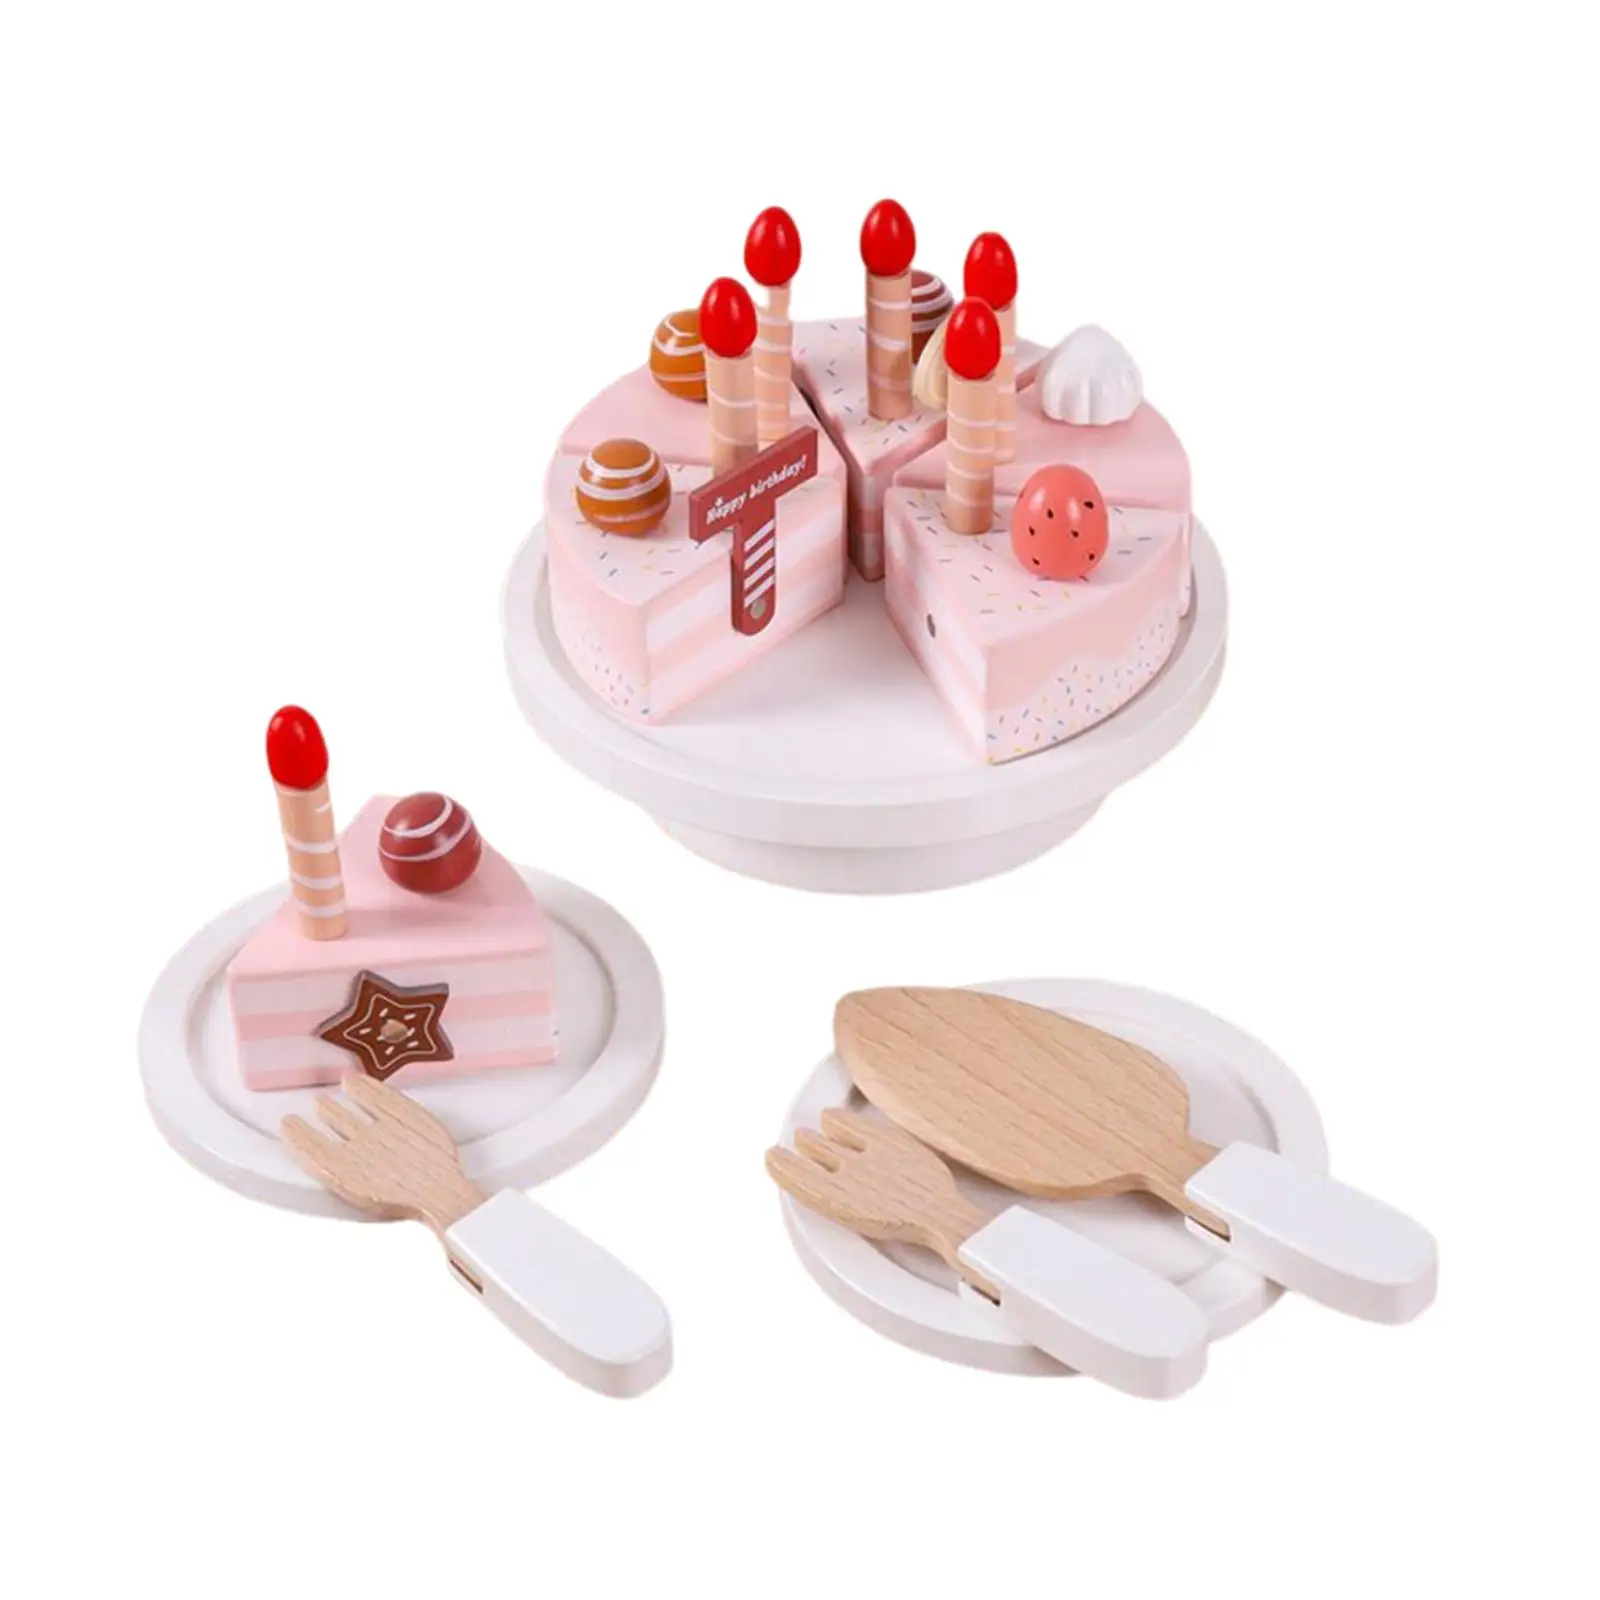 Wooden Cake Toys with Candles Education Role Play Toys DIY Pretend Play Food Kitchen Toys for Boys Kids Preschool Holiday Gifts